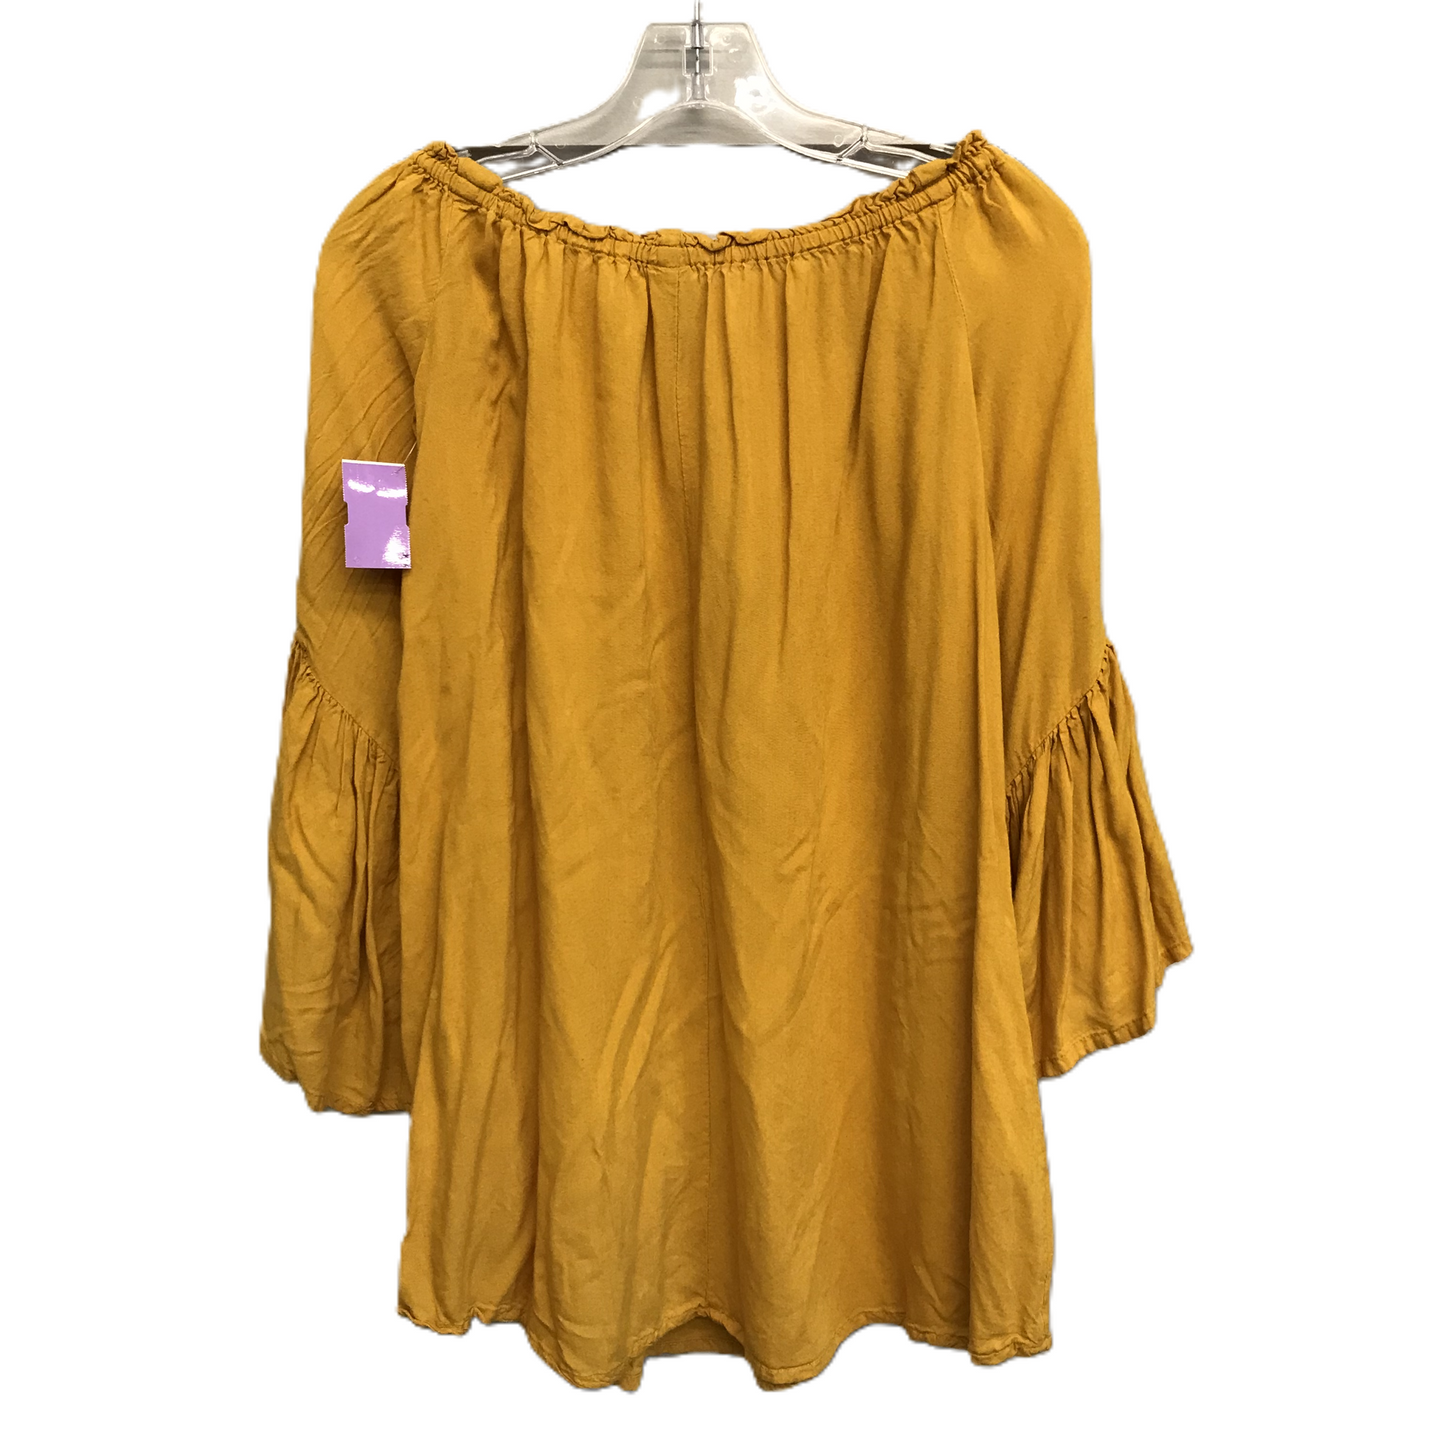 Yellow Top Long Sleeve By Feathers, Size: M